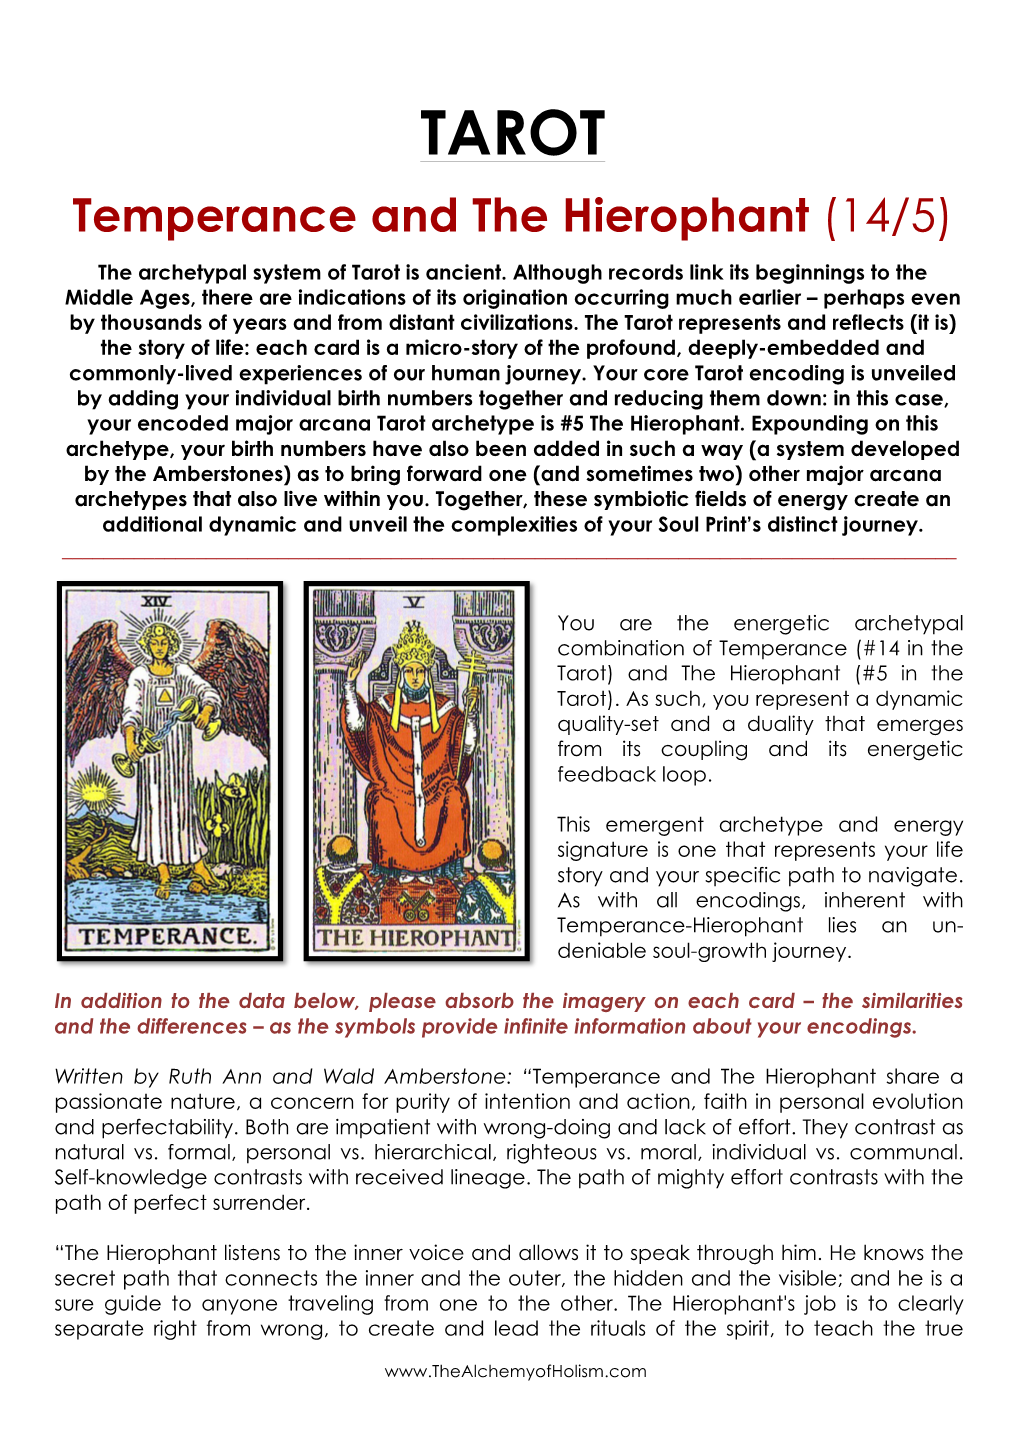 Temperance and the Hierophant (14/5)